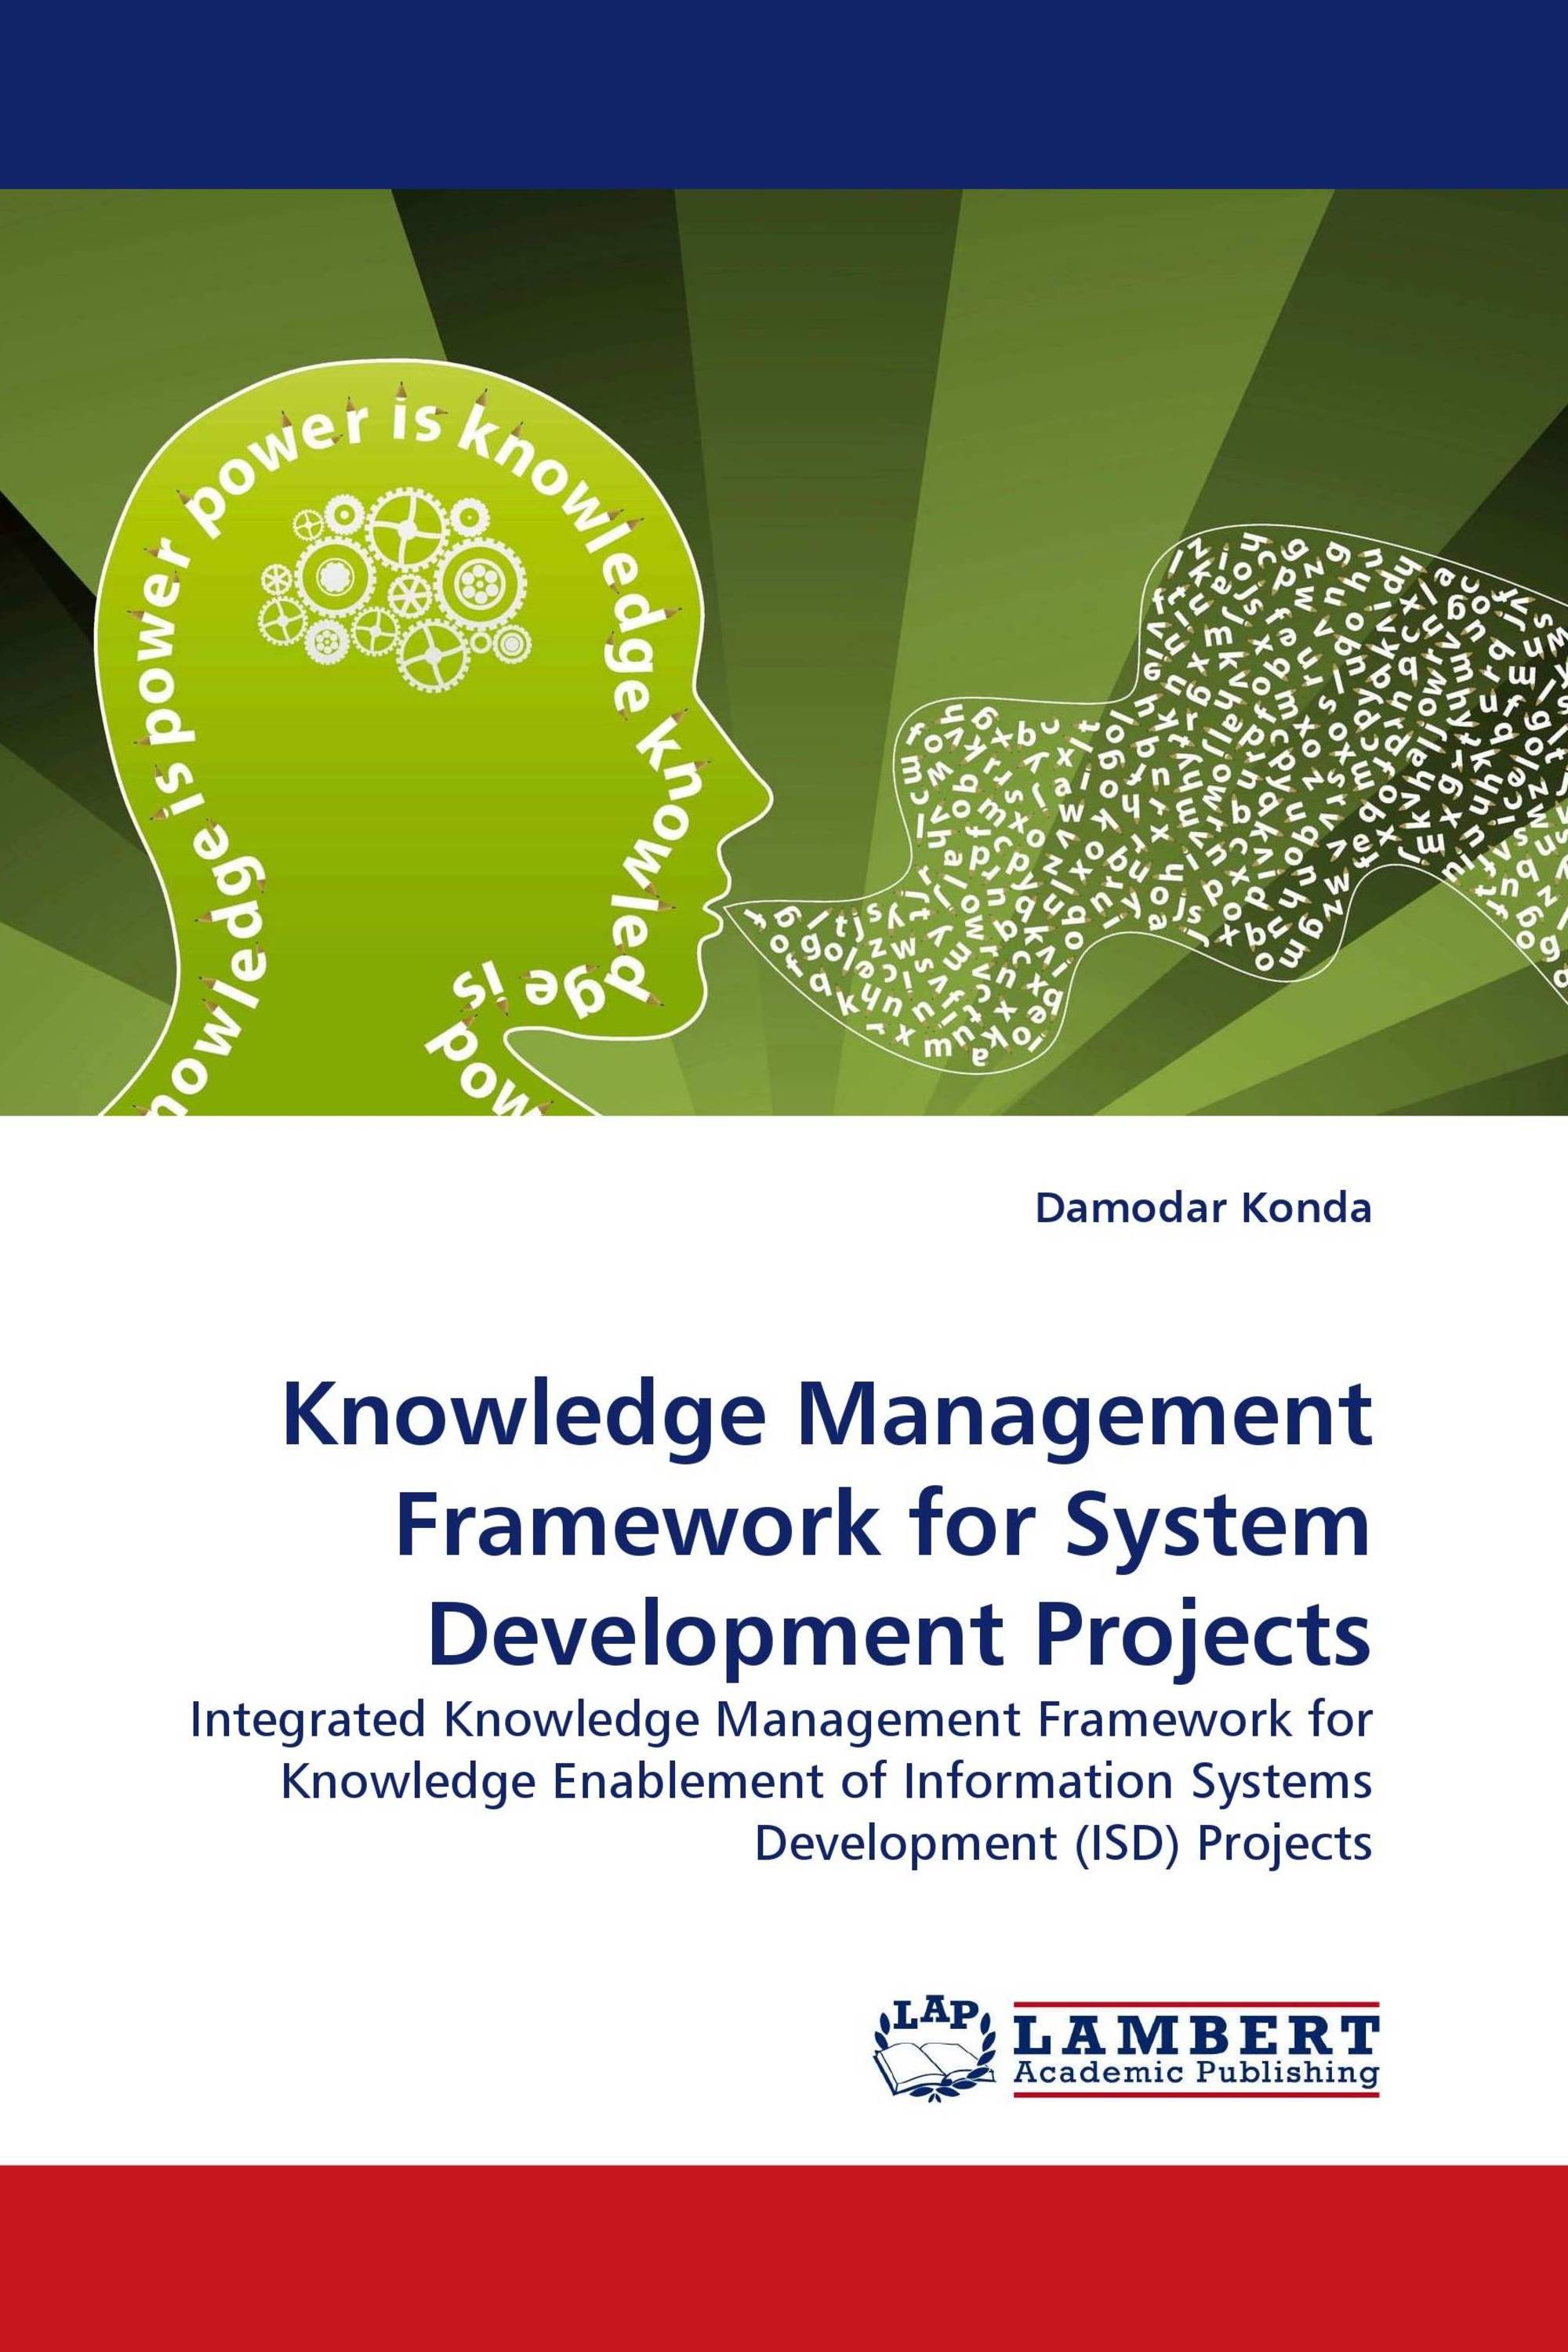 Knowledge Management Framework for System Development Projects